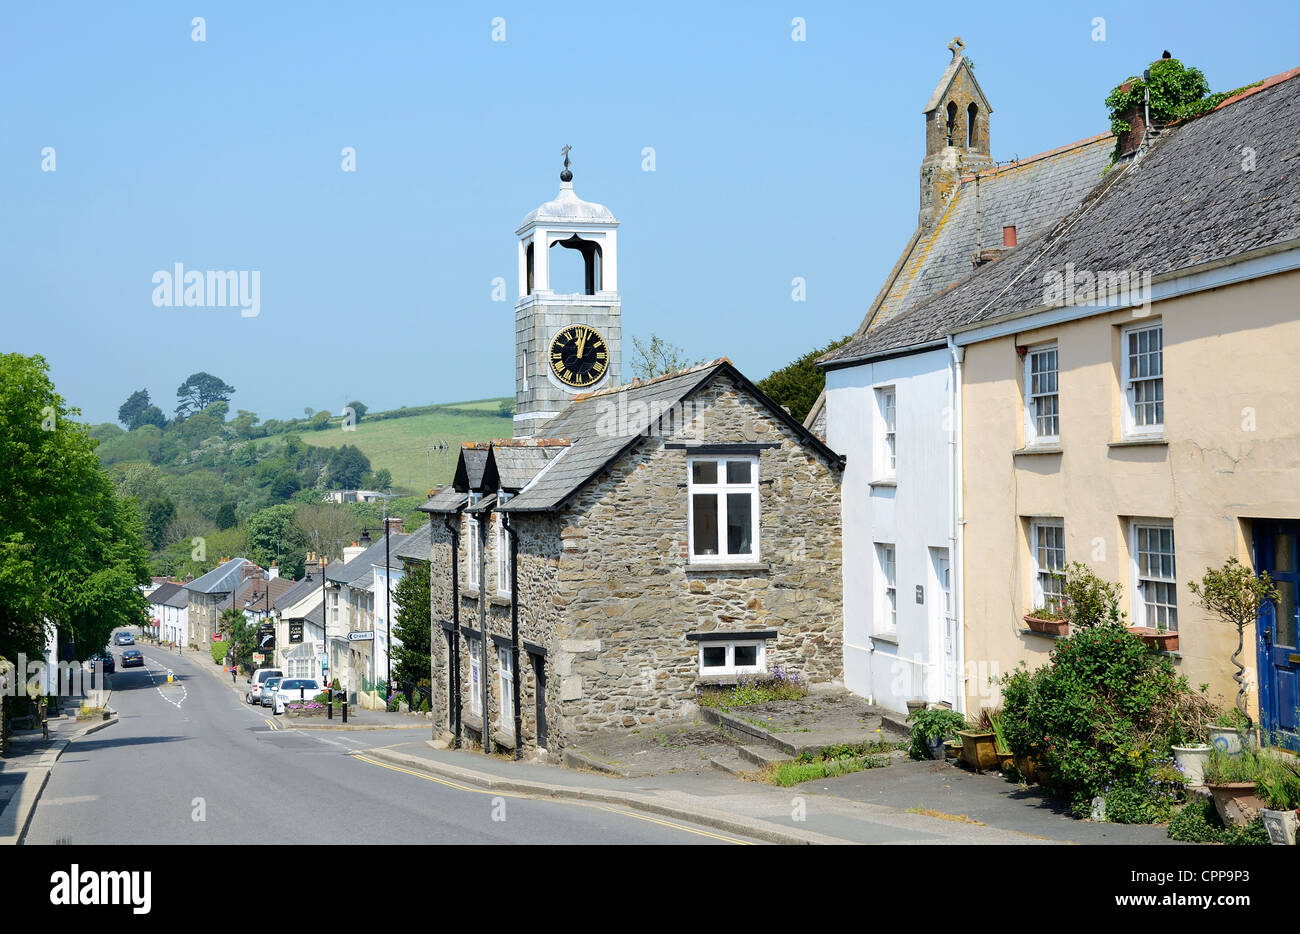 The Ancient township of Grampound in Cornwall, UK Stock Photo